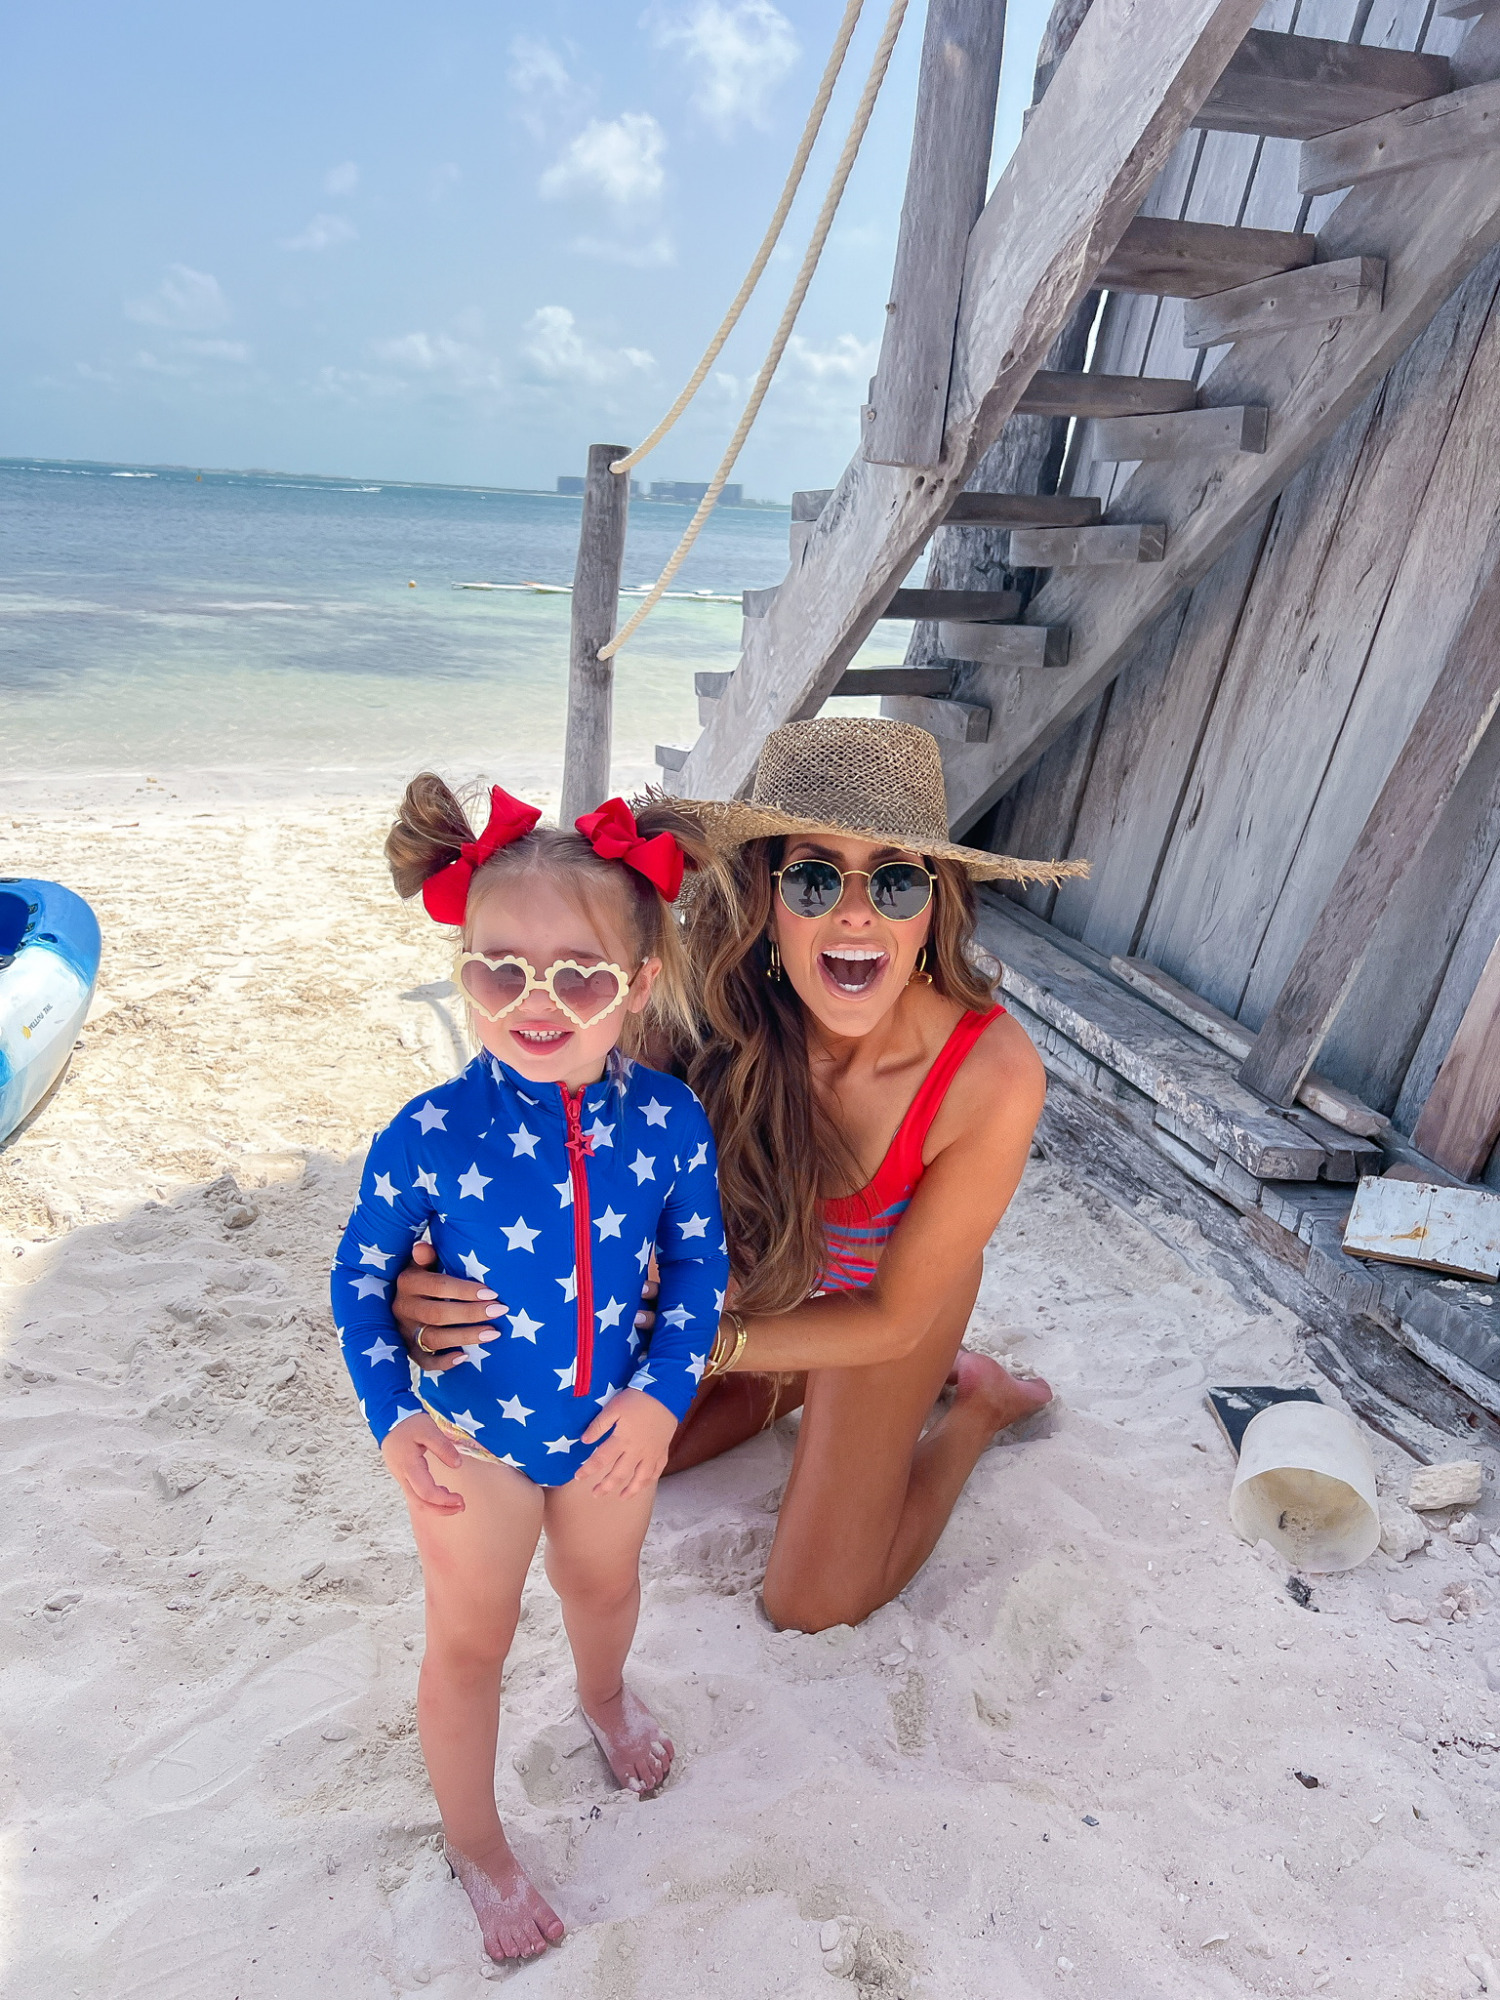 4th of july outfit ideas 2022, beach riot swimsuit, fourth of july, nizuc resort and spa, mother daughter matching swimsuit emily gemma 7